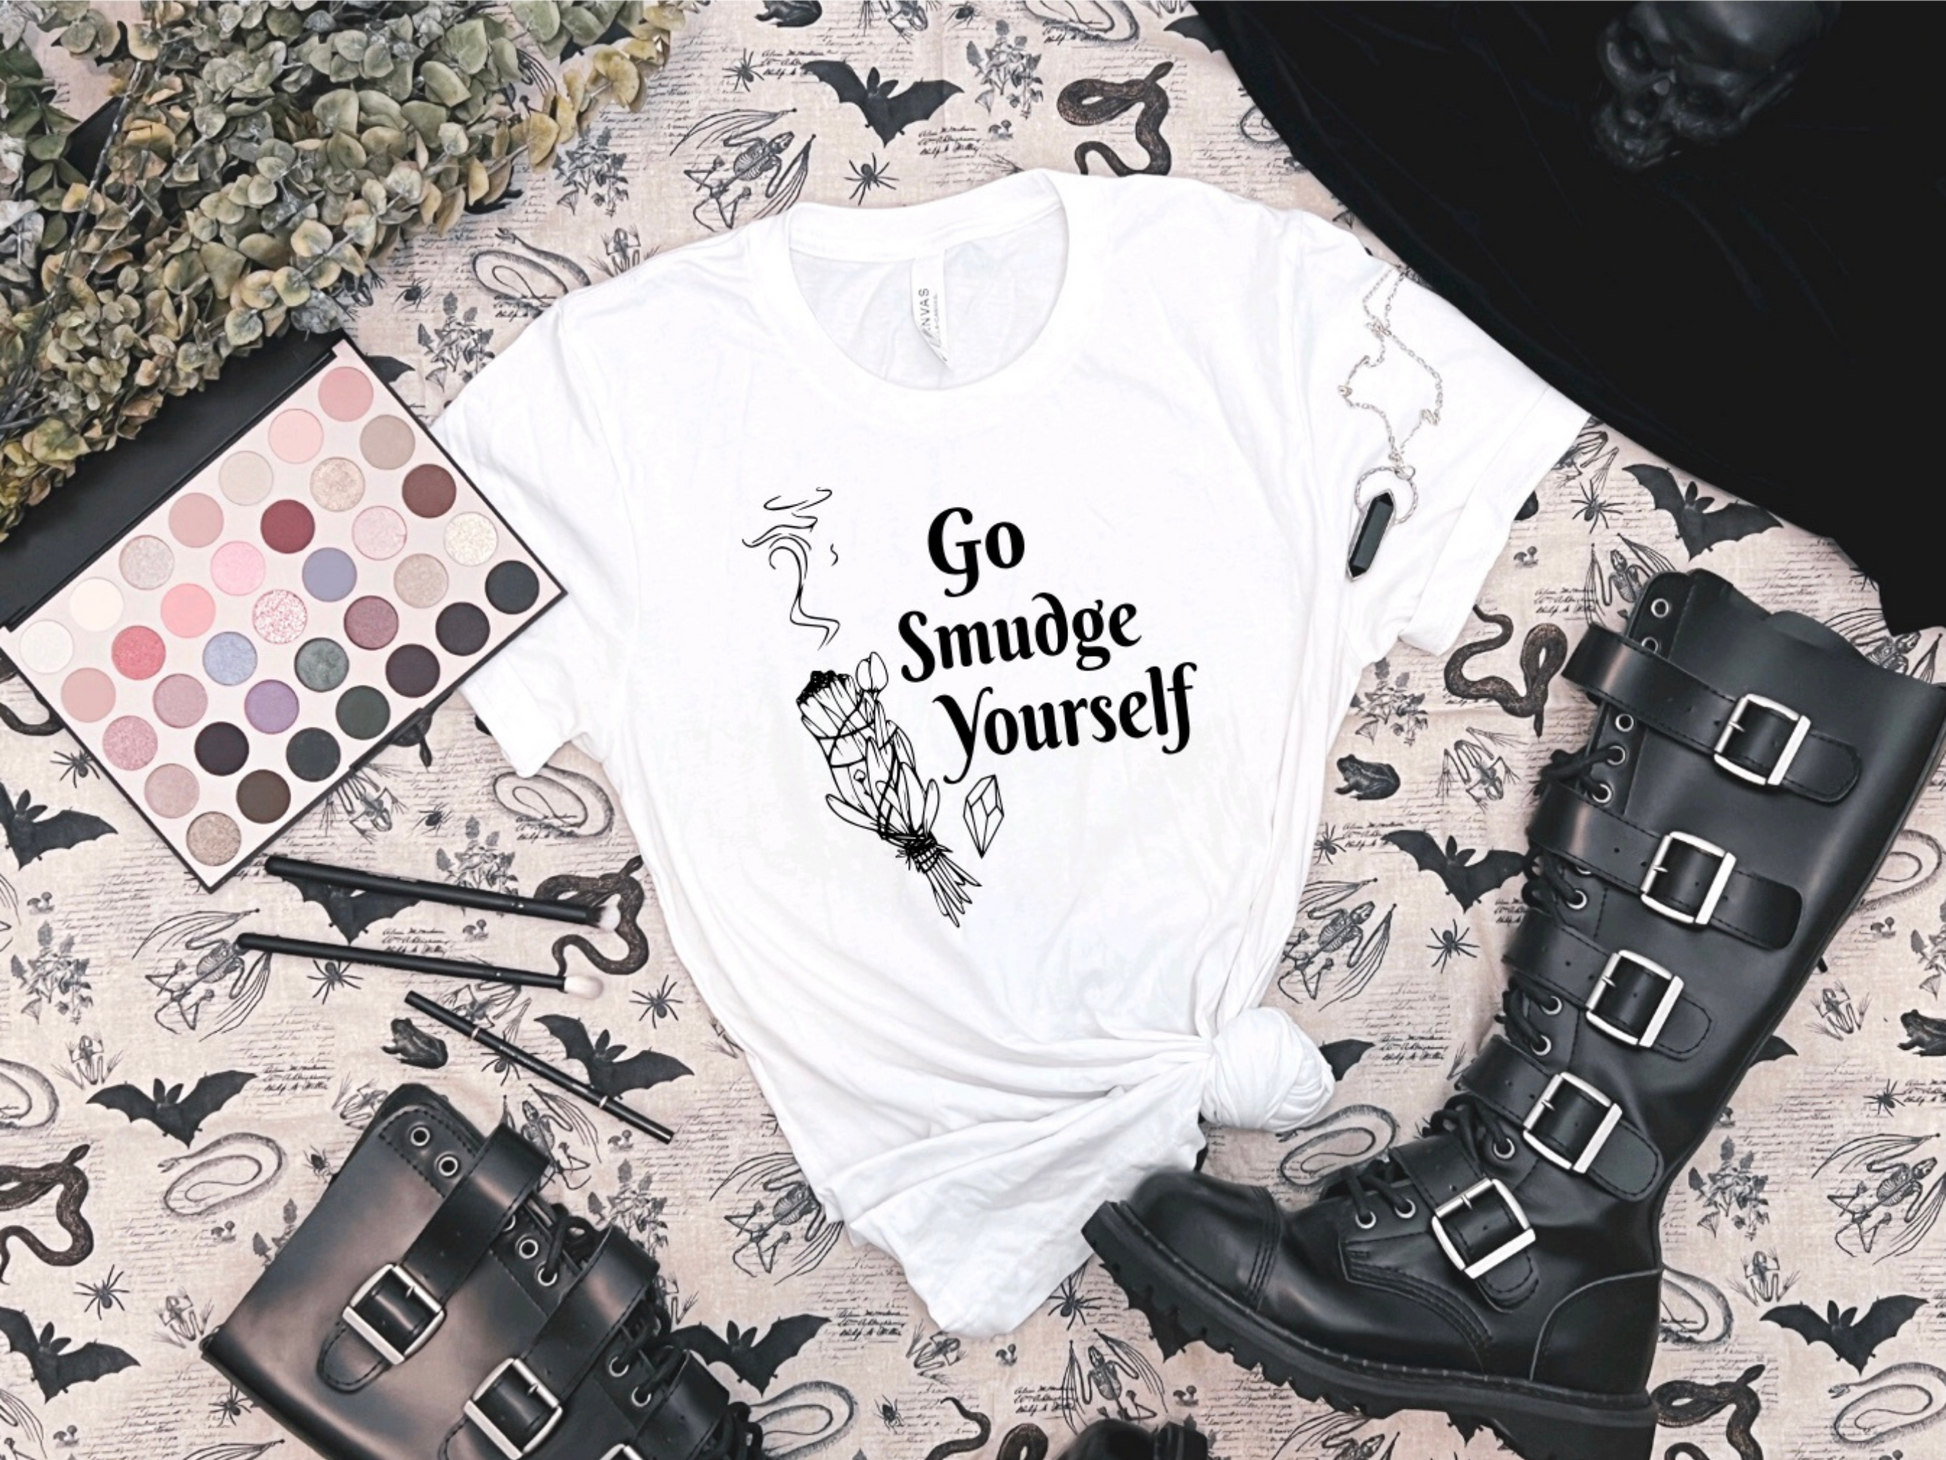 Go Smudge Yourself White Crew Neck T-shirt